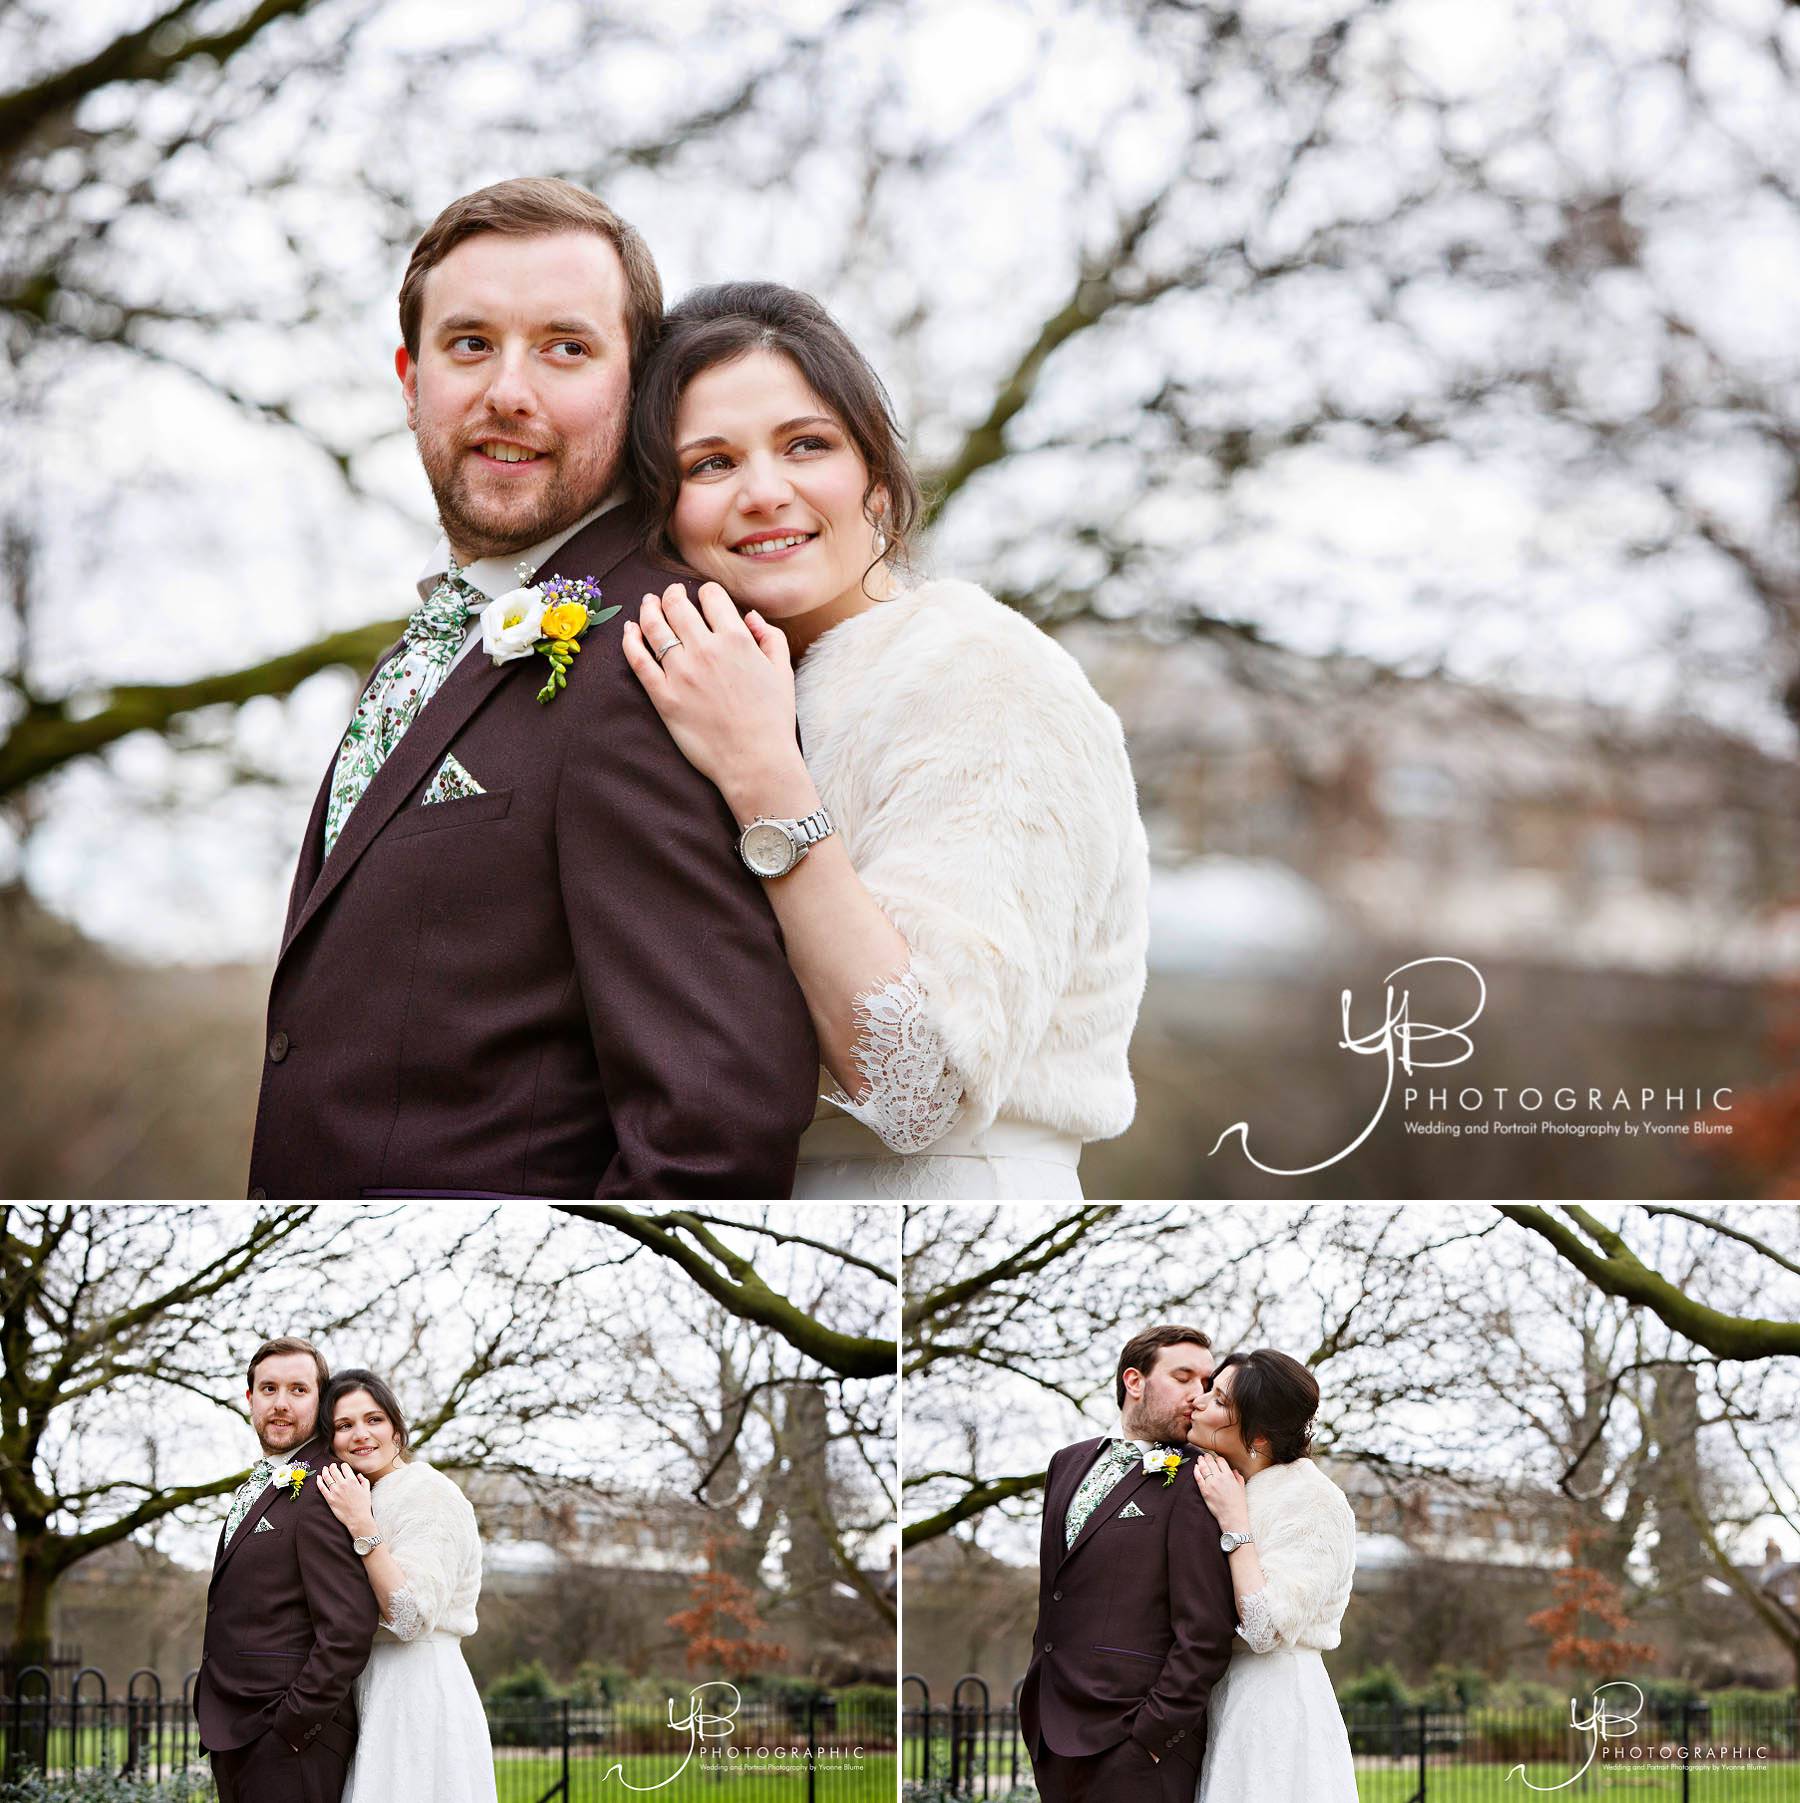 Winter Wedding Portraits at Southwark Register Office by YBPHOTOGRAPHIC